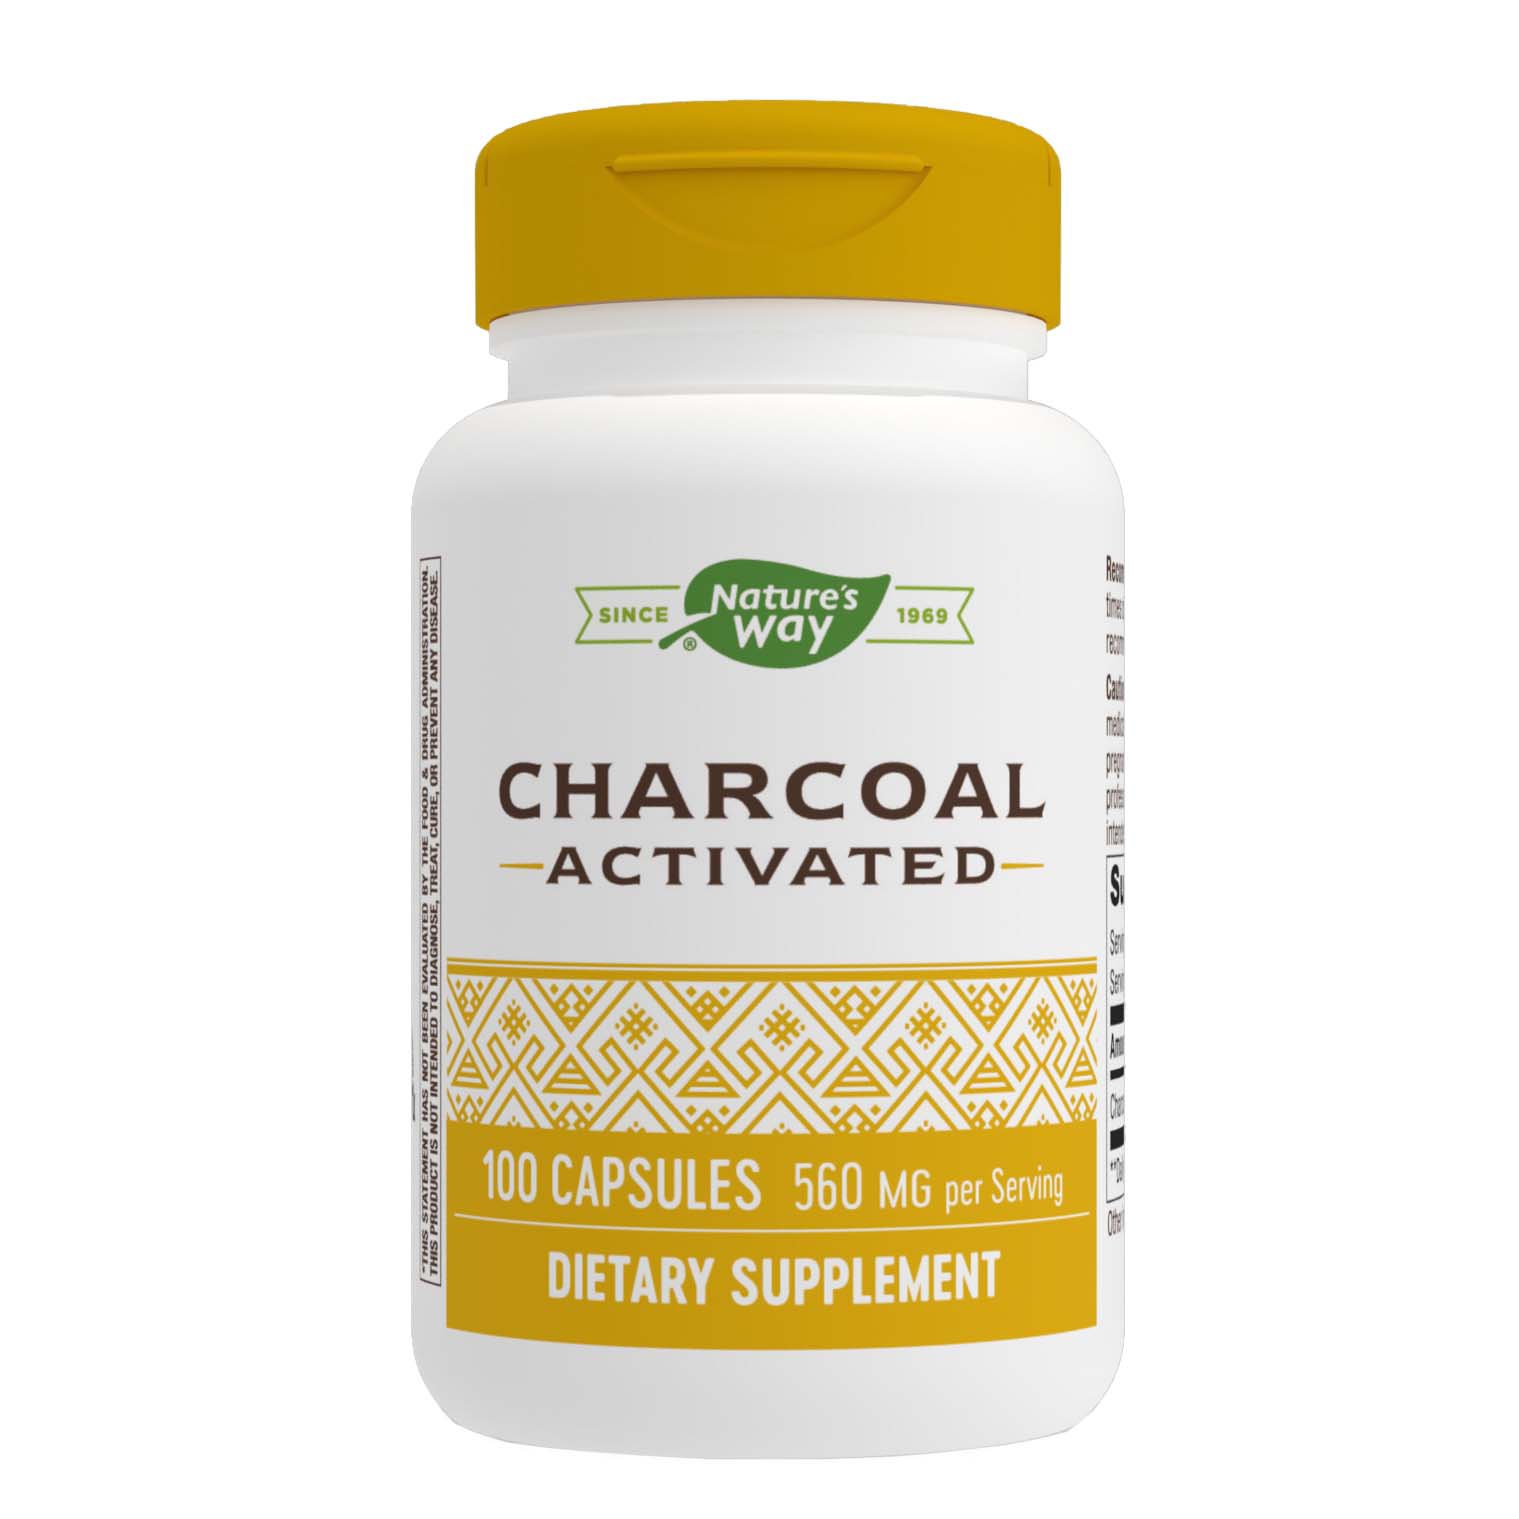 What Is Activated Charcoal? - Live Science